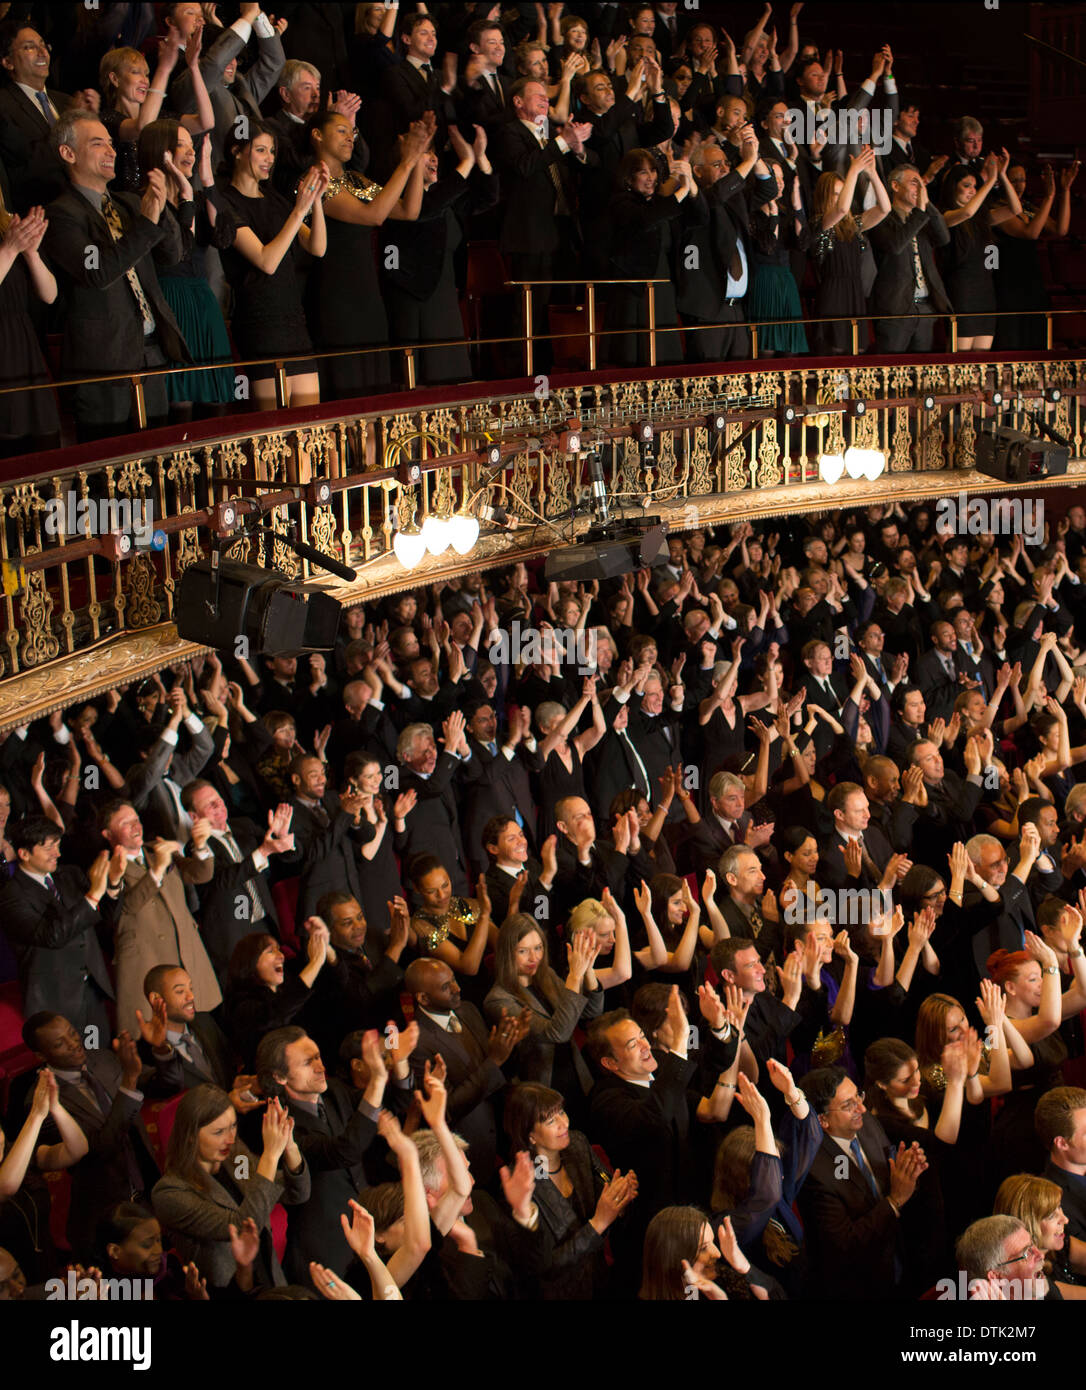 Audience applauding in theatre Banque D'Images